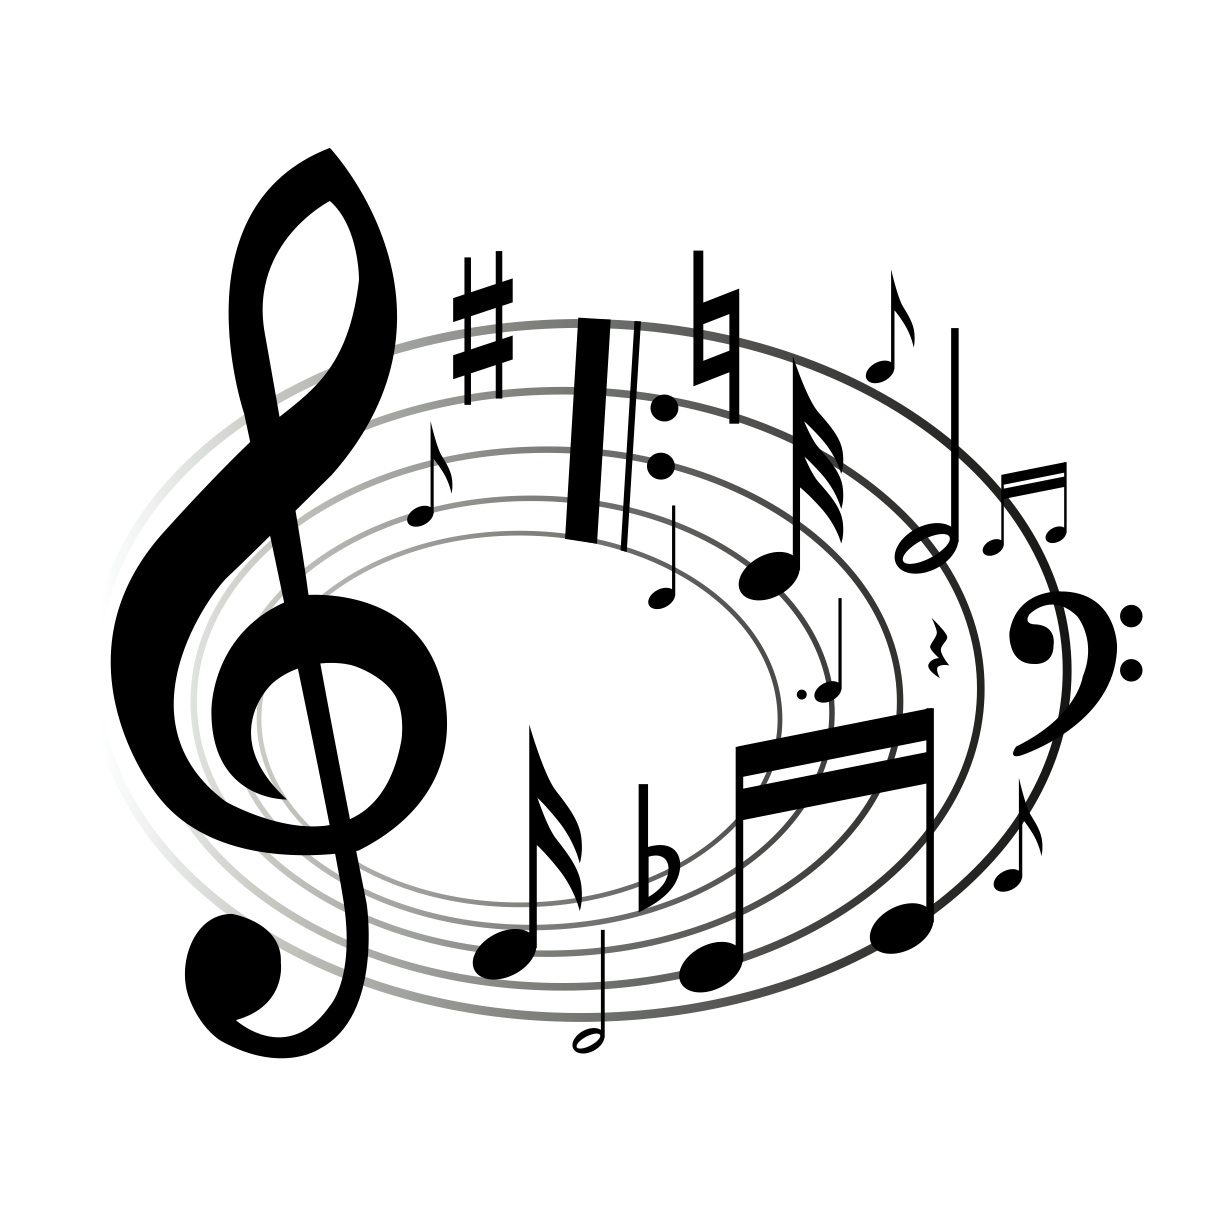 free vector clipart music notes - photo #7